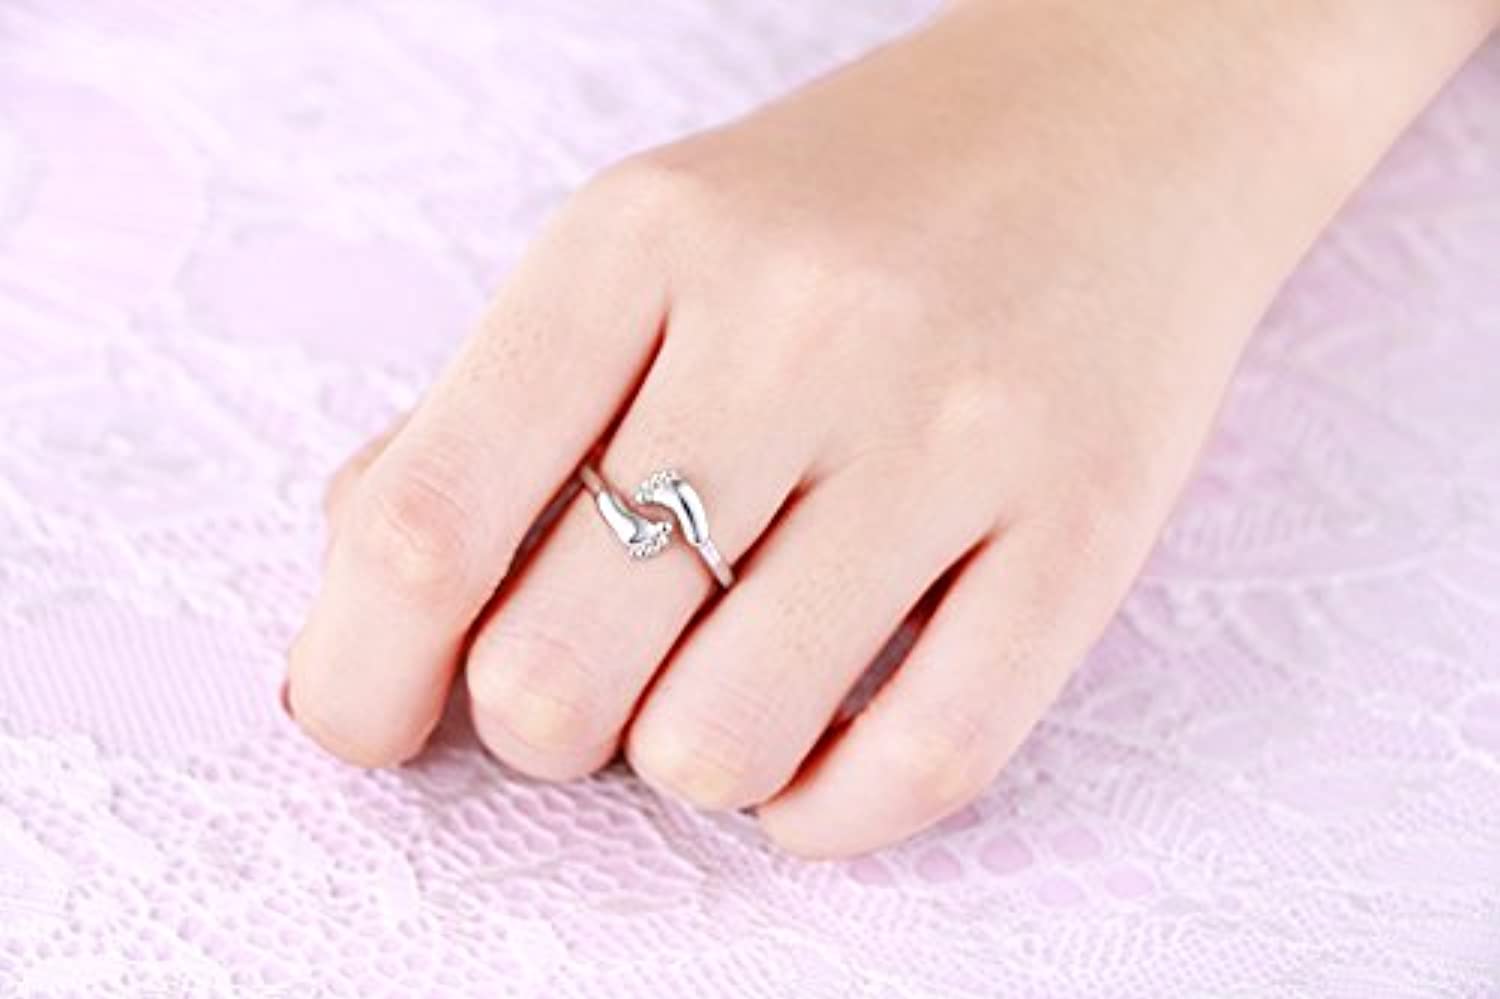 925 Sterling Silver Infinity Love Forever Family Cute Baby Feet Open Wrap Ring for Women Mom Teens,Size 6 7 8